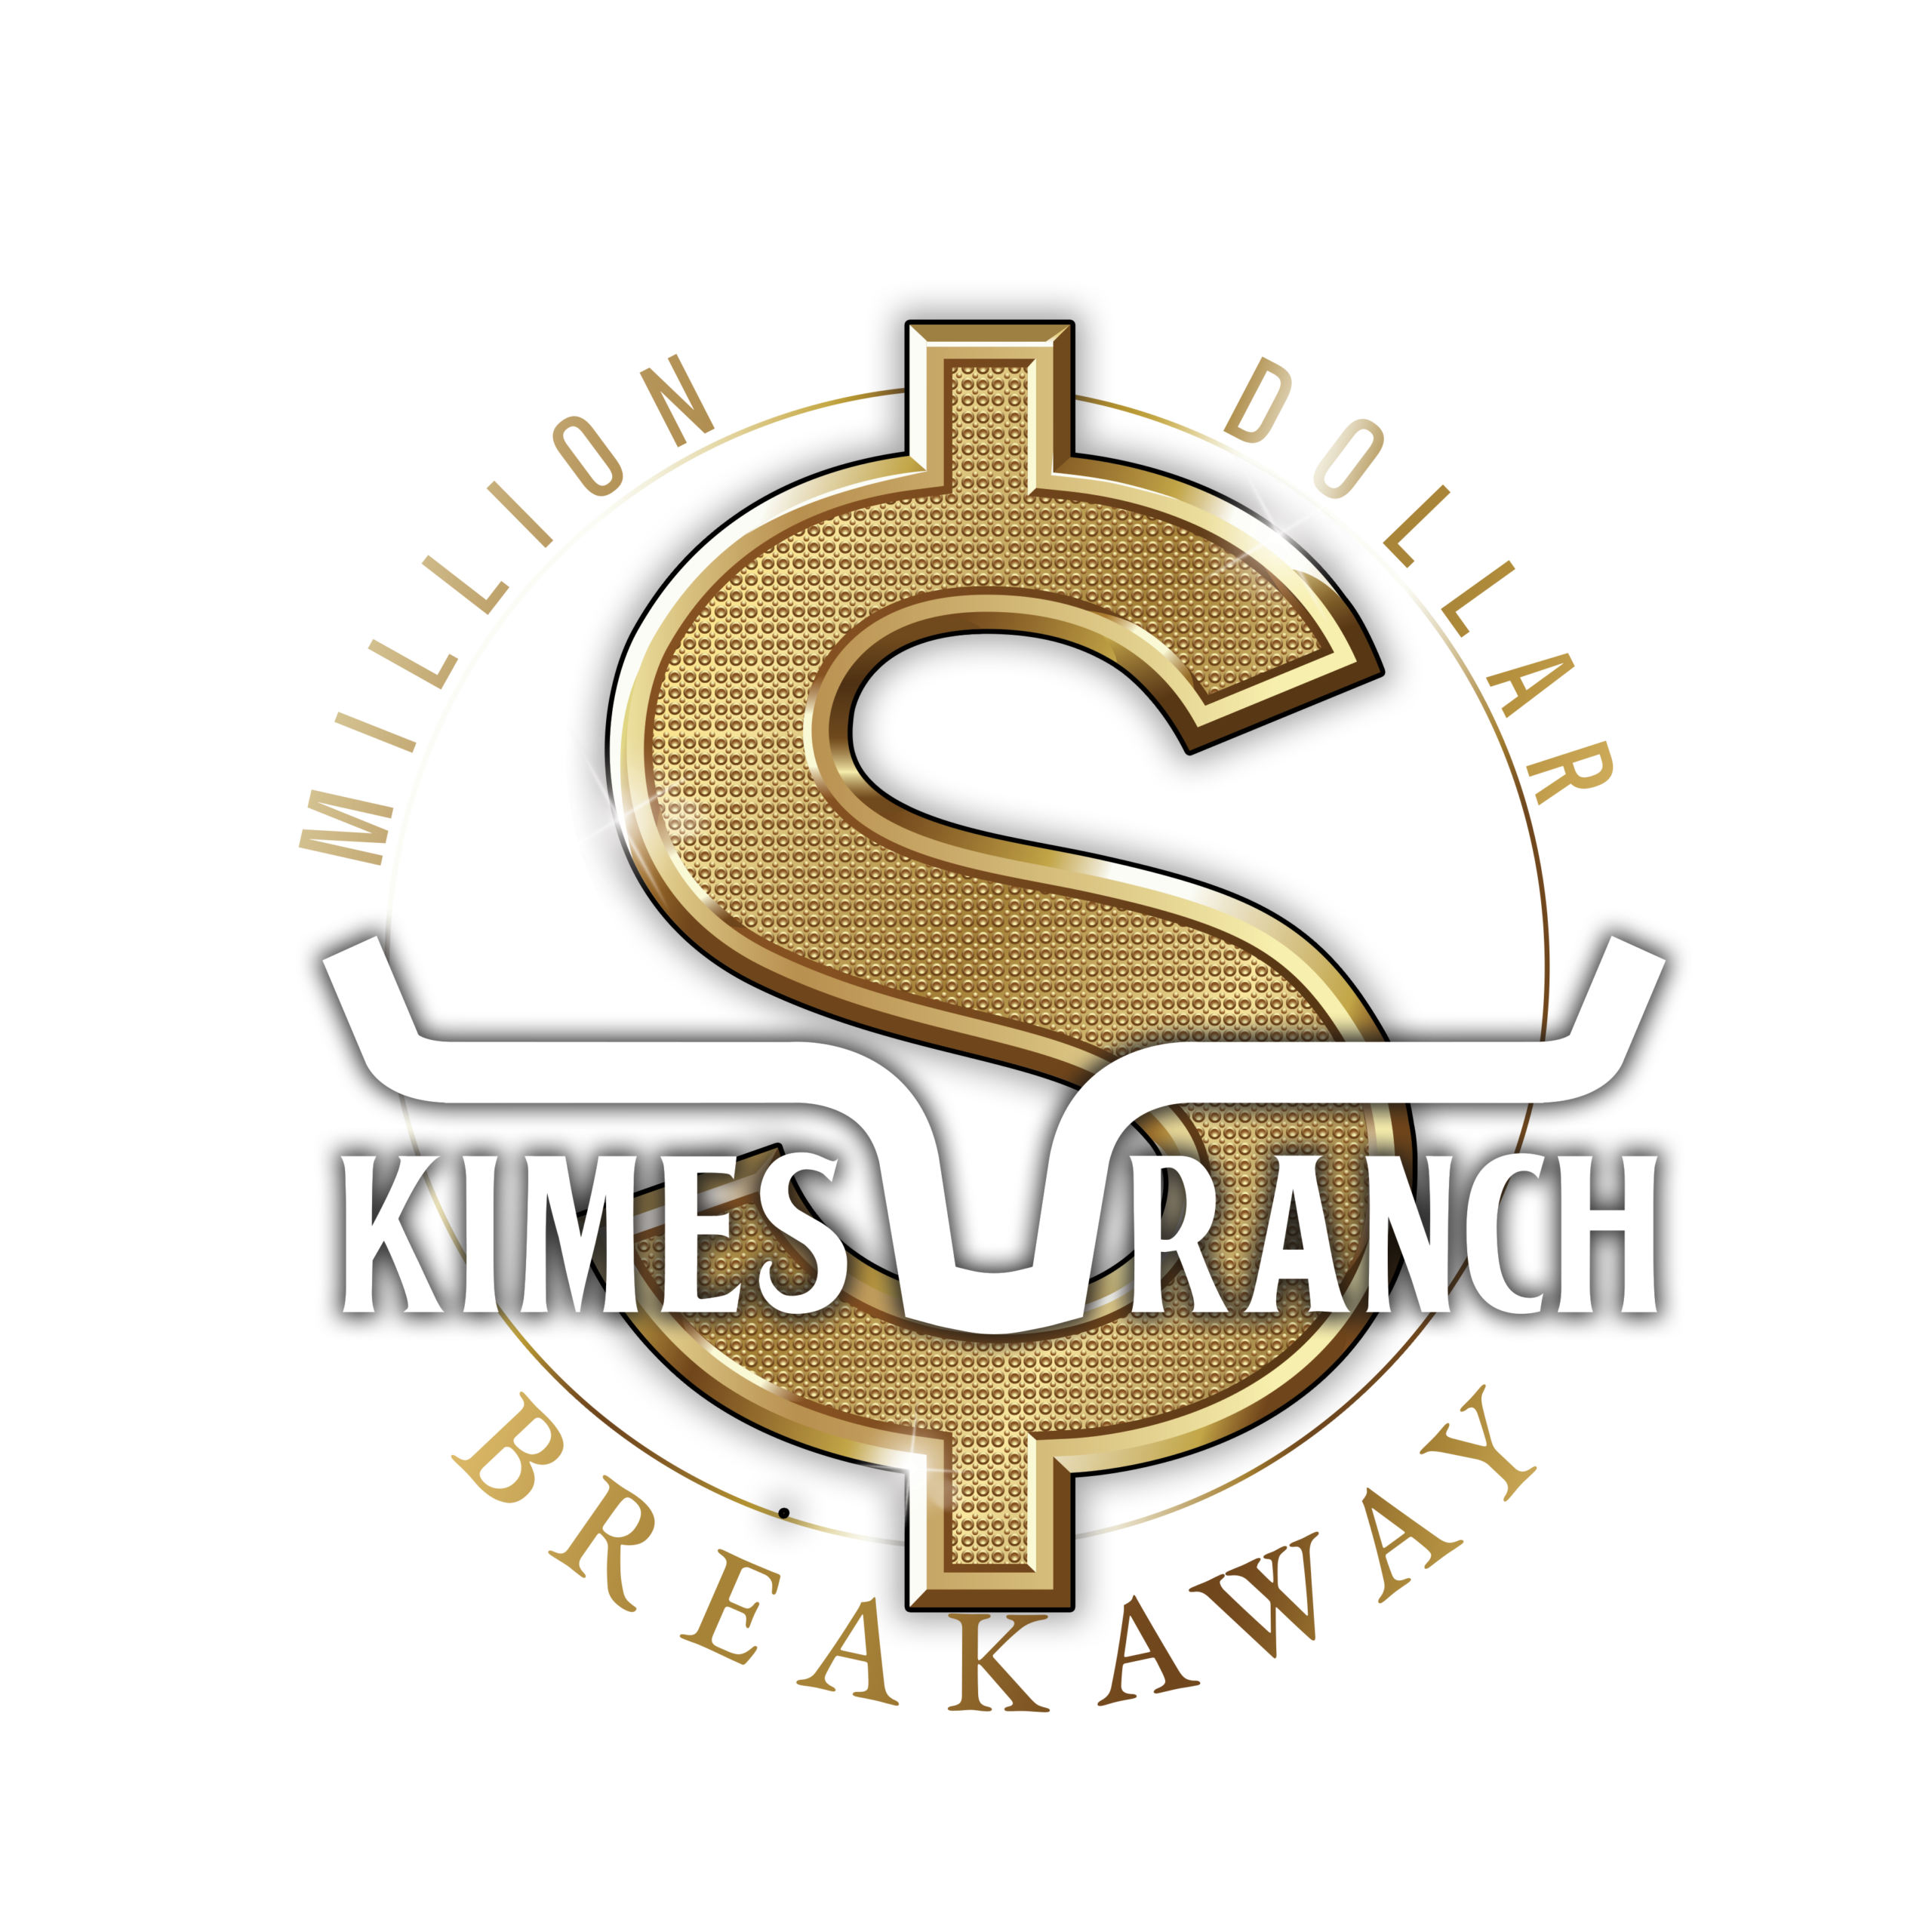 Kimes Ranch Breakaway logo with golden dollar and rope circle.